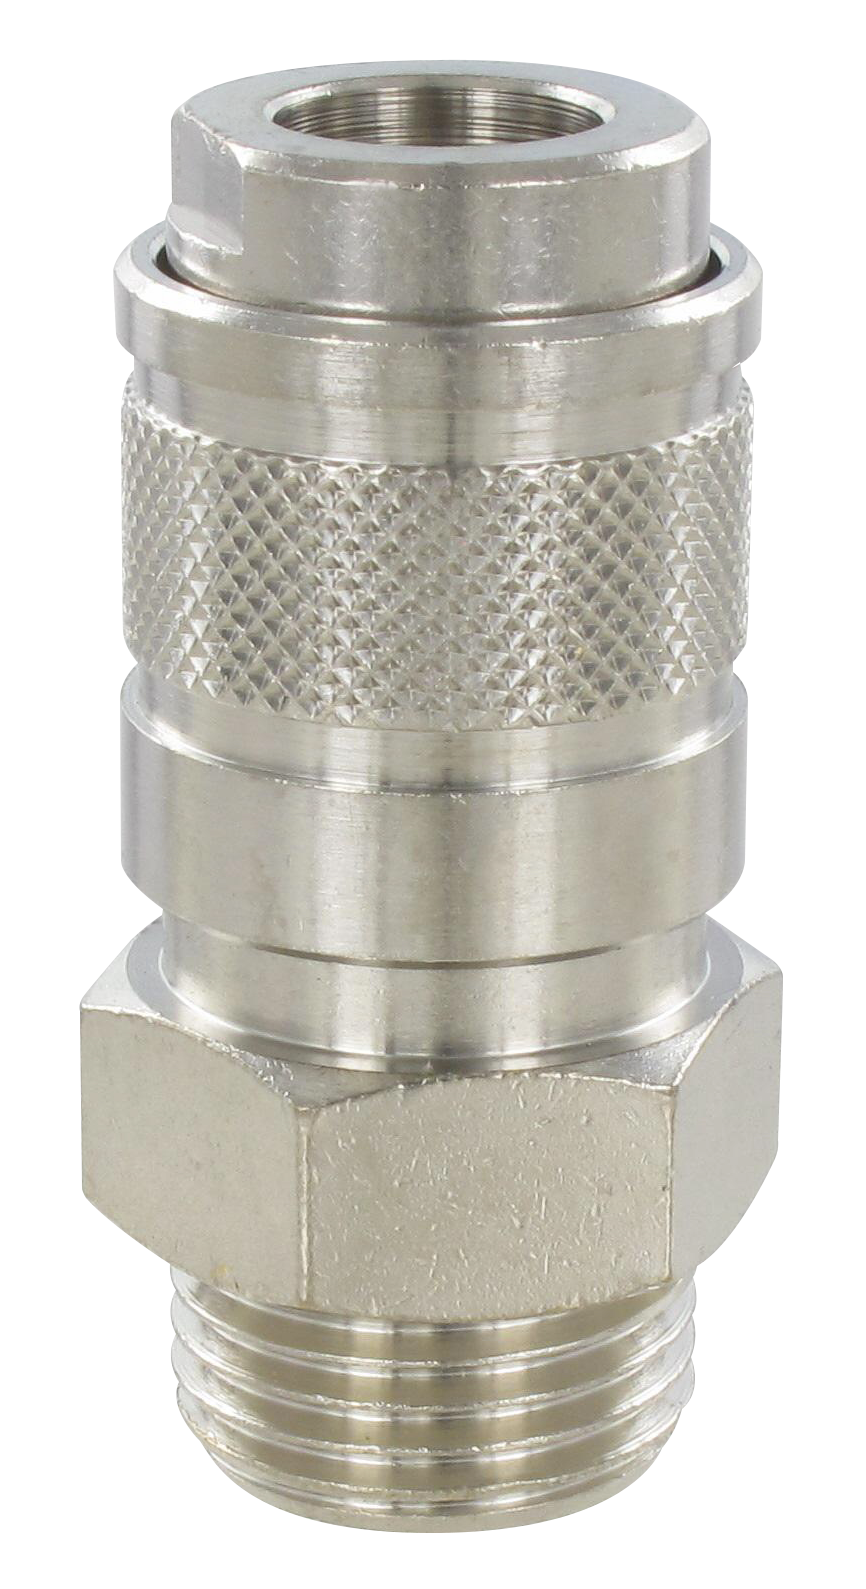 Quick-connect couplings, US-MIL standard ISO 6150 B-12 MALE SOCKET Quick-connect couplings, US-MIL standard ISO 6150 B-12